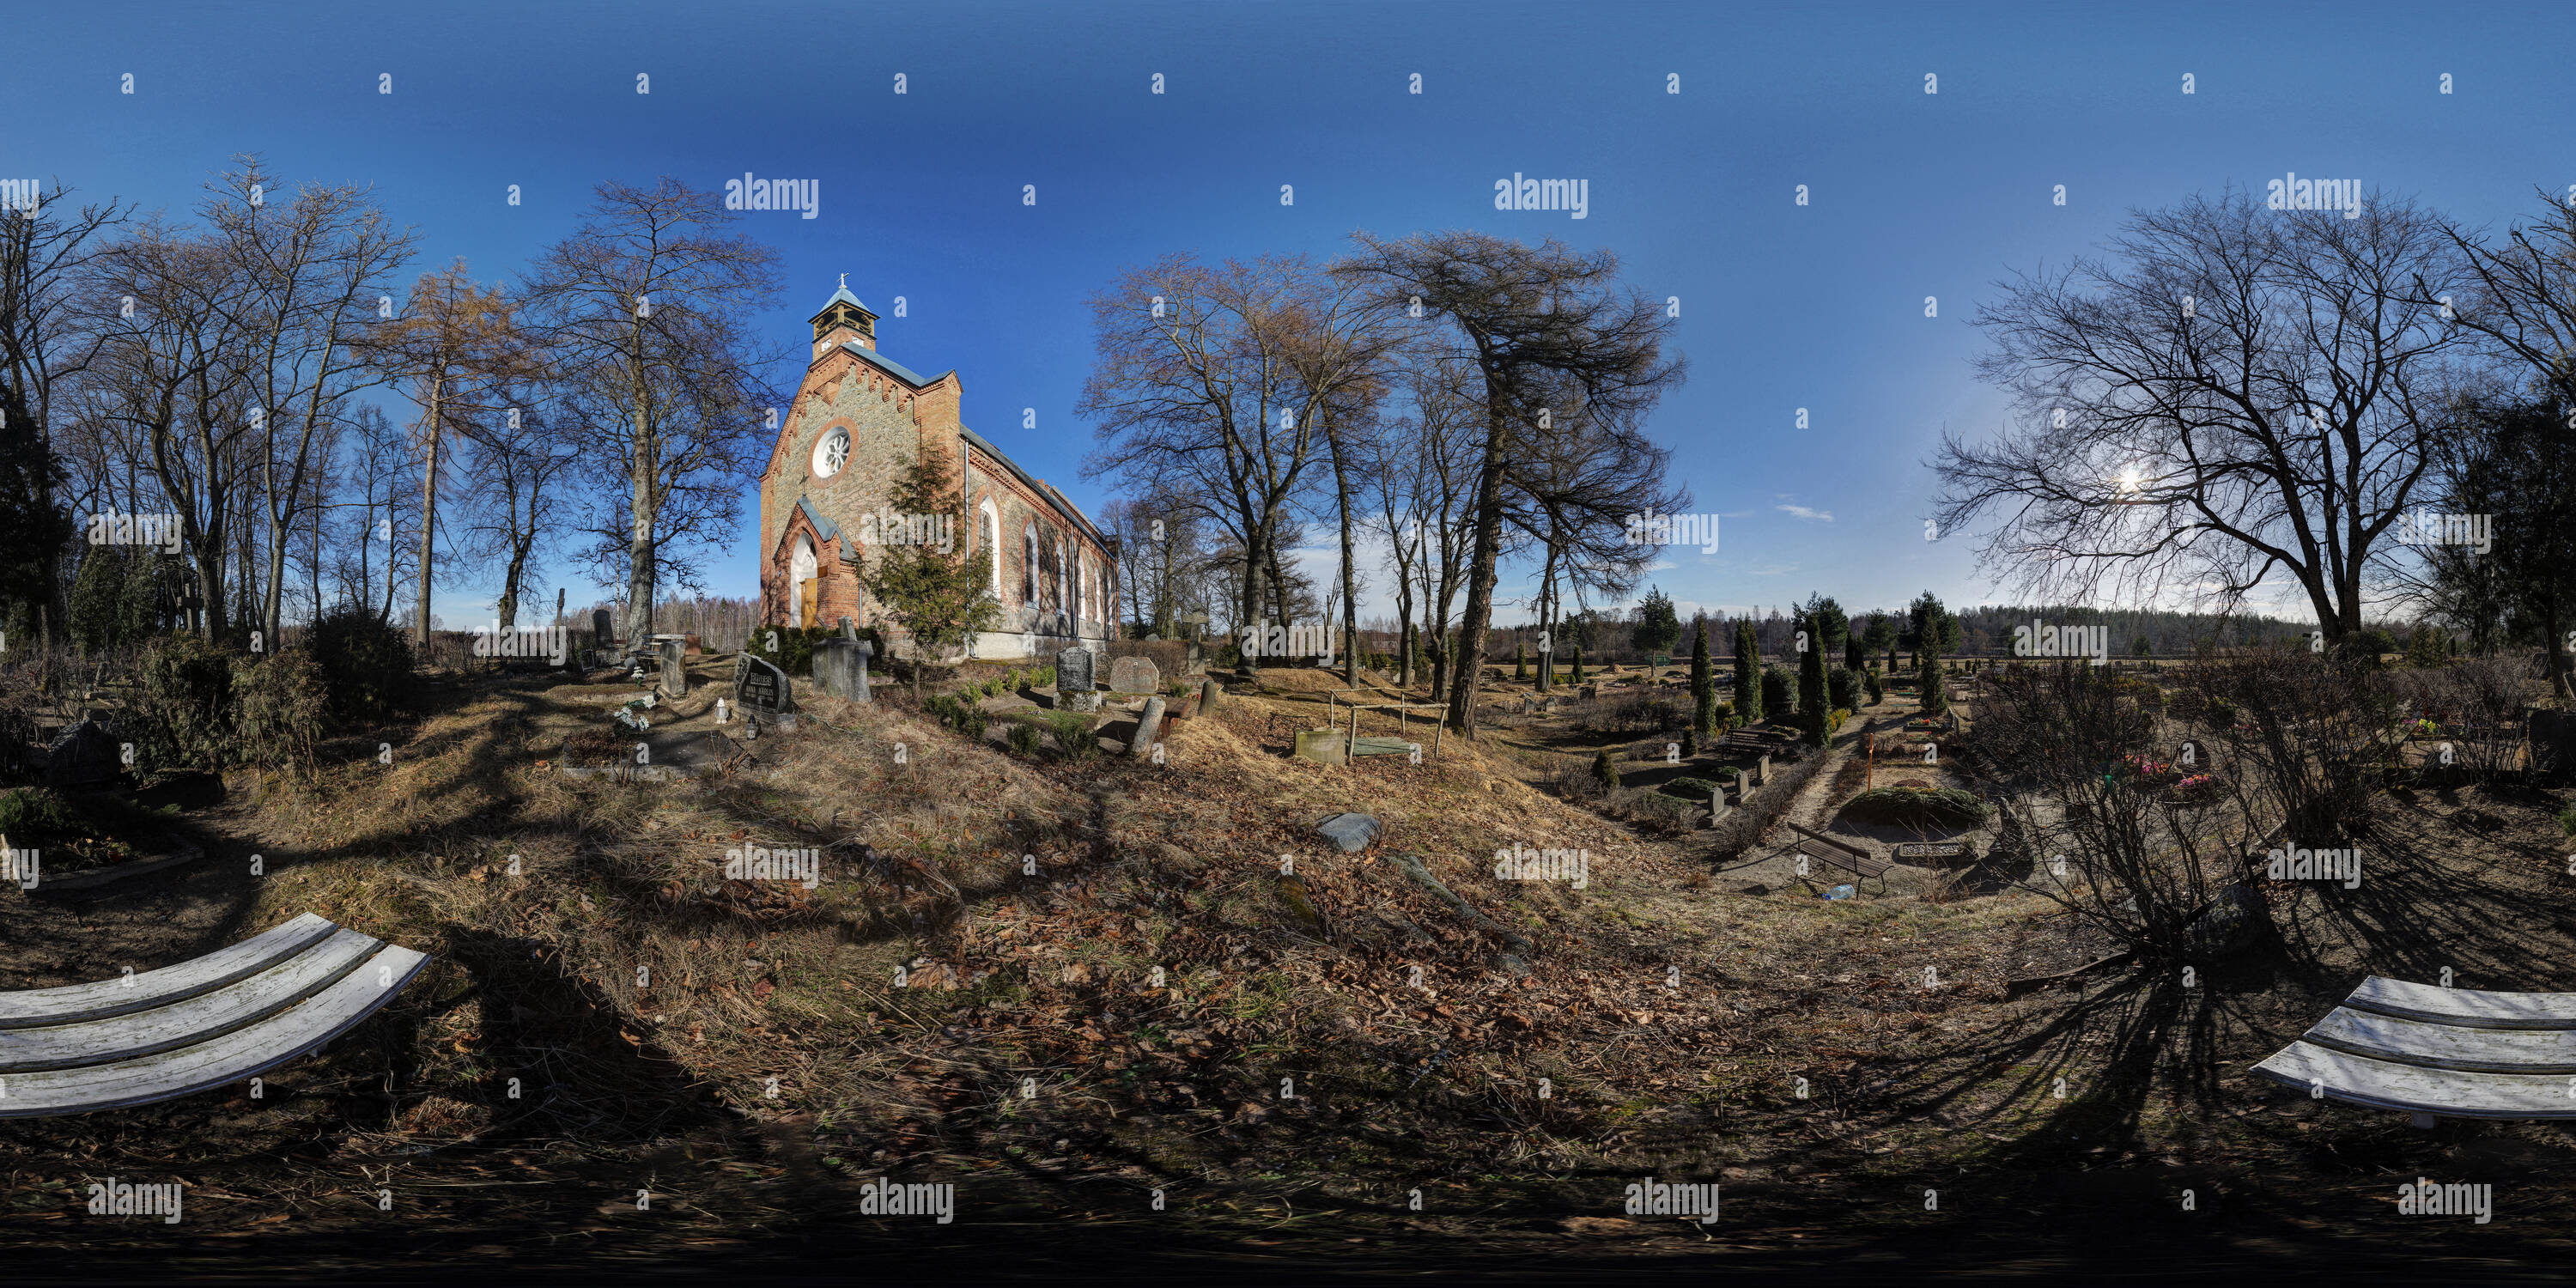 360 degree panoramic view of Dalbe Church and cemetery